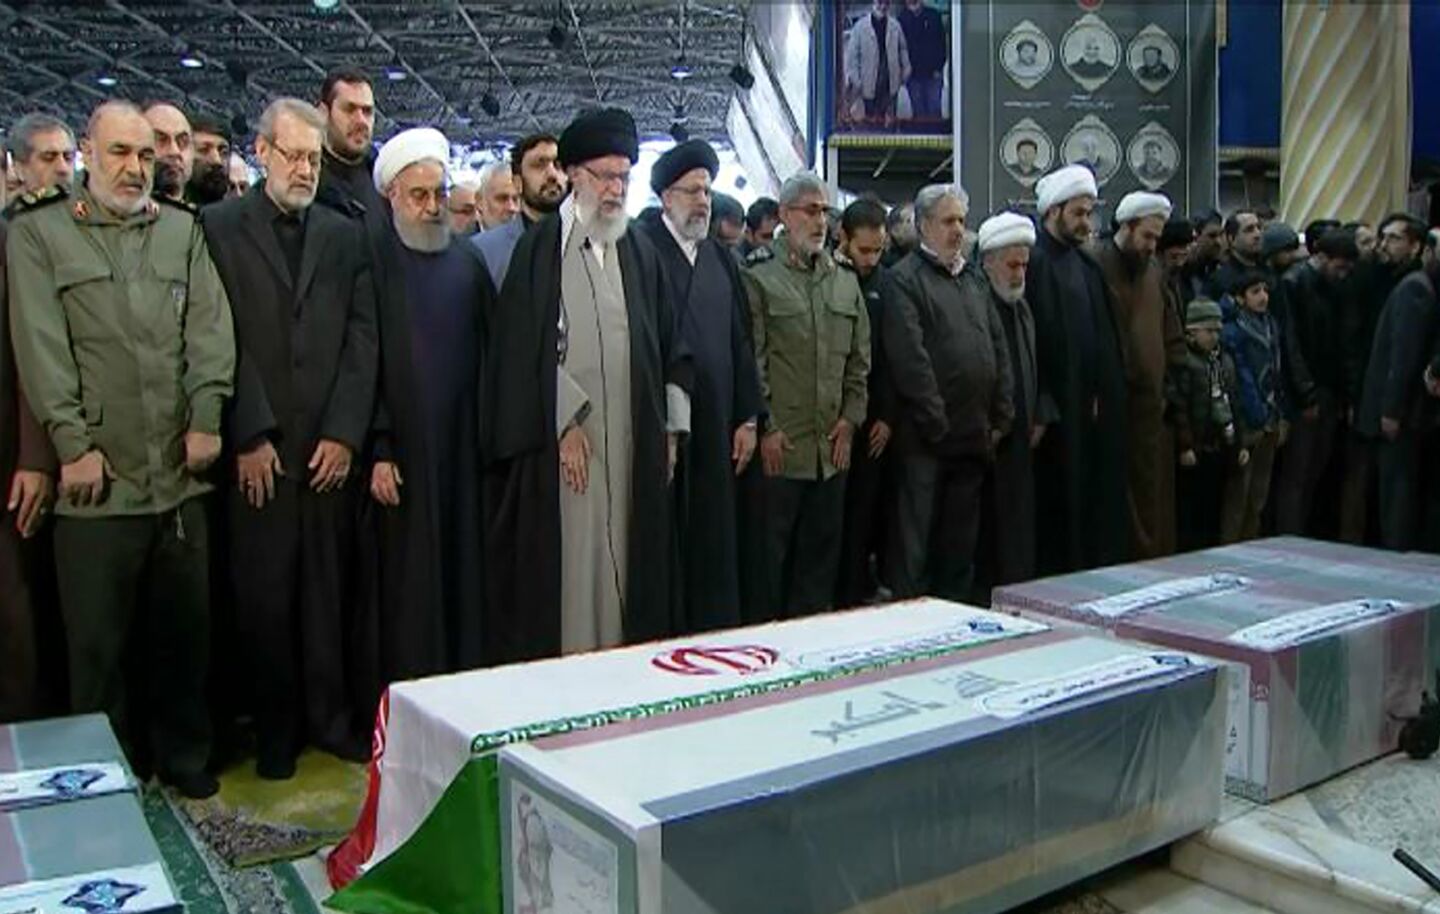 Ayatollah Ali Khamenei,, fourth from left, leads a prayer during the funeral.